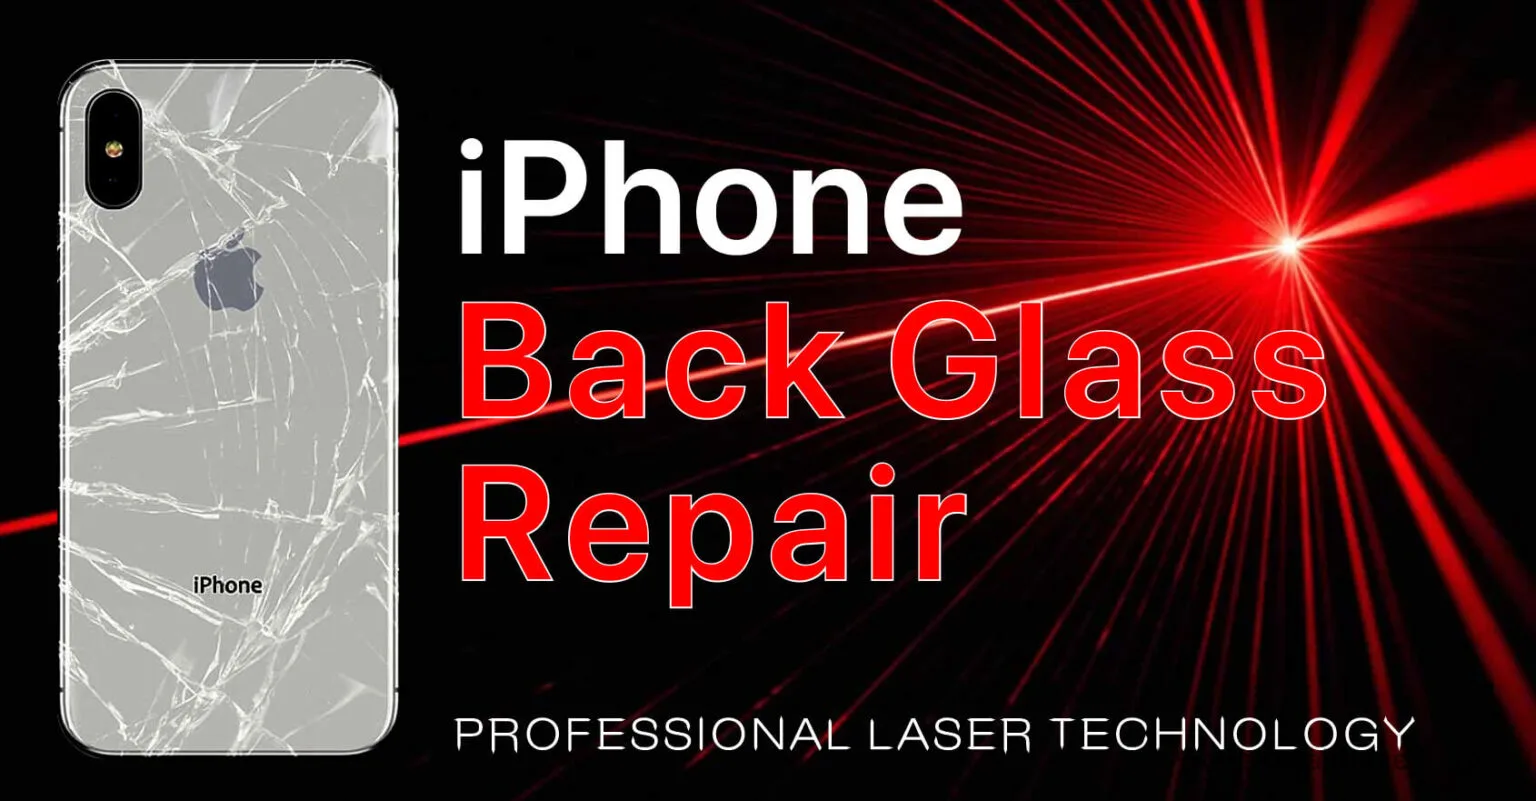 iphone back glass repair with laser machine